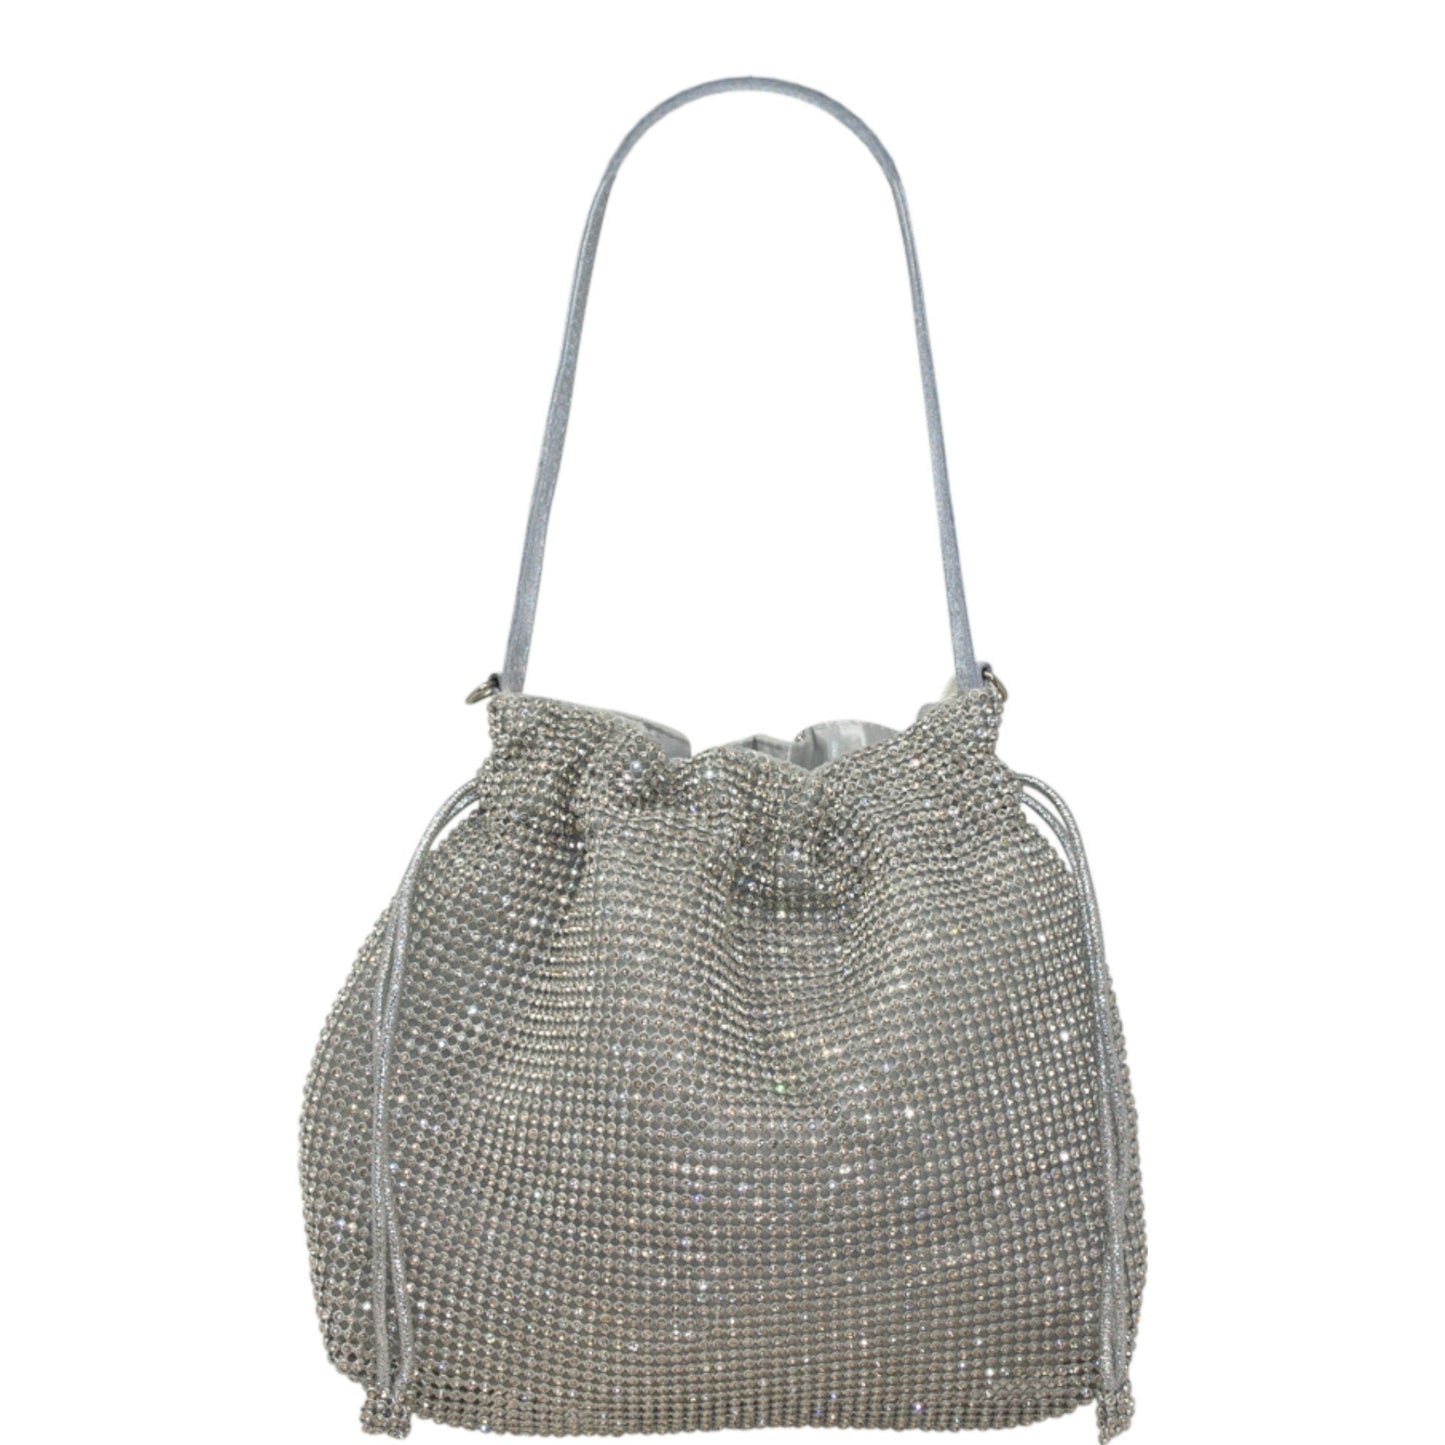 Sparkly Diamante Silver Draw String Shoulder Bag perfect eye-catching Silver handbag Gift Present Wedding Party Valentines Gift For Her